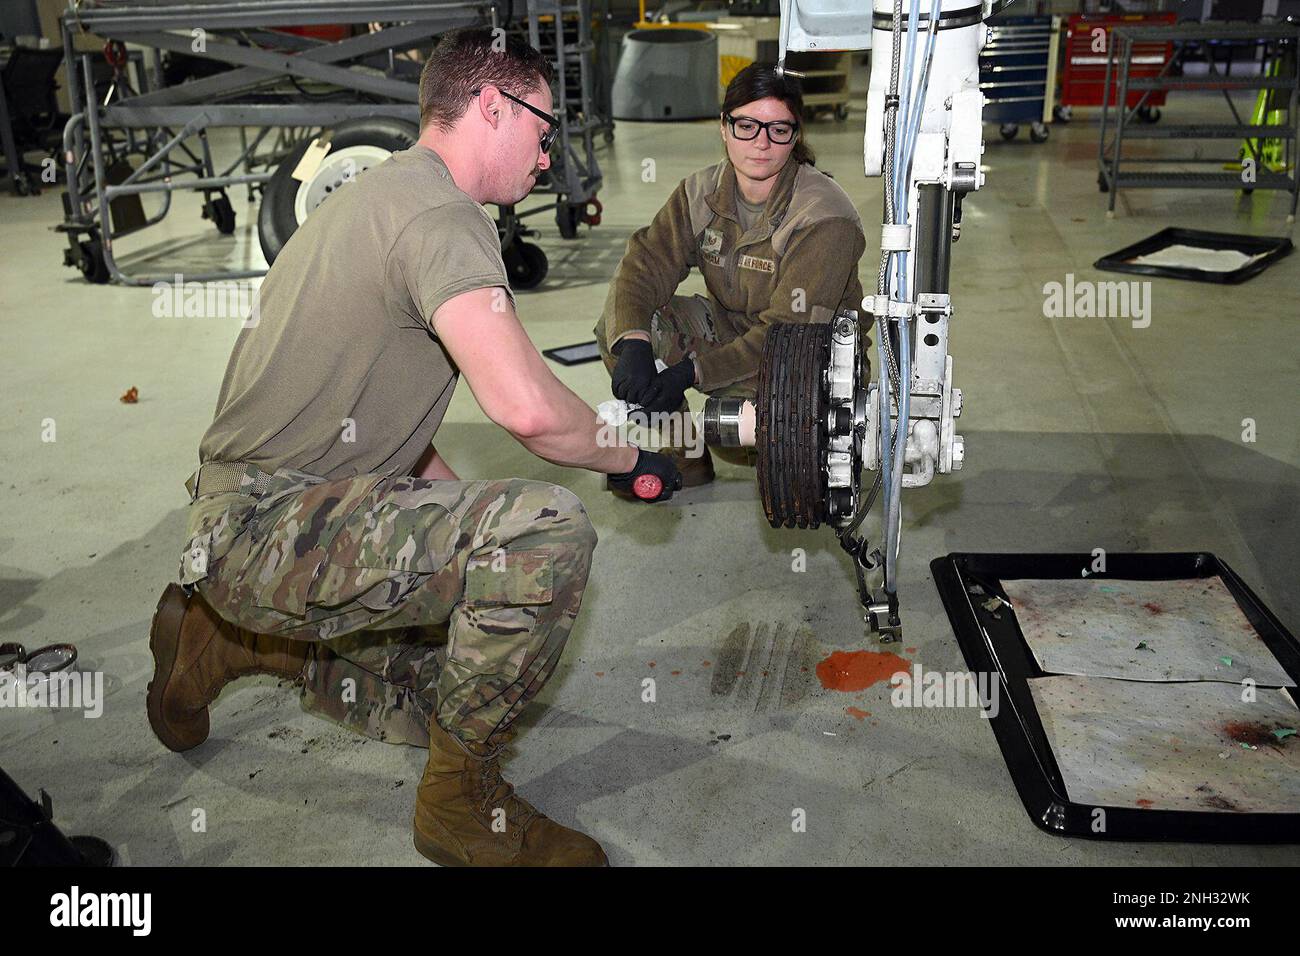 Master Sgt. Keith Hardy, phase work leader, and Staff Sgt. Julia Dunham, aircraft mechanic, both from the 127th Maintenance Squadron, Selfridge Air National Guard Base, Michigan, repack the brake and wheel assembly strut on an A-10 Thunderbolt II during a Phase 1 inspection on Dec. 9, 2022. Airmen of the 127th Maintenance Squadron phase crew are tasked to perform detailed inspections to make sure this complex jet remains air ready. Stock Photo